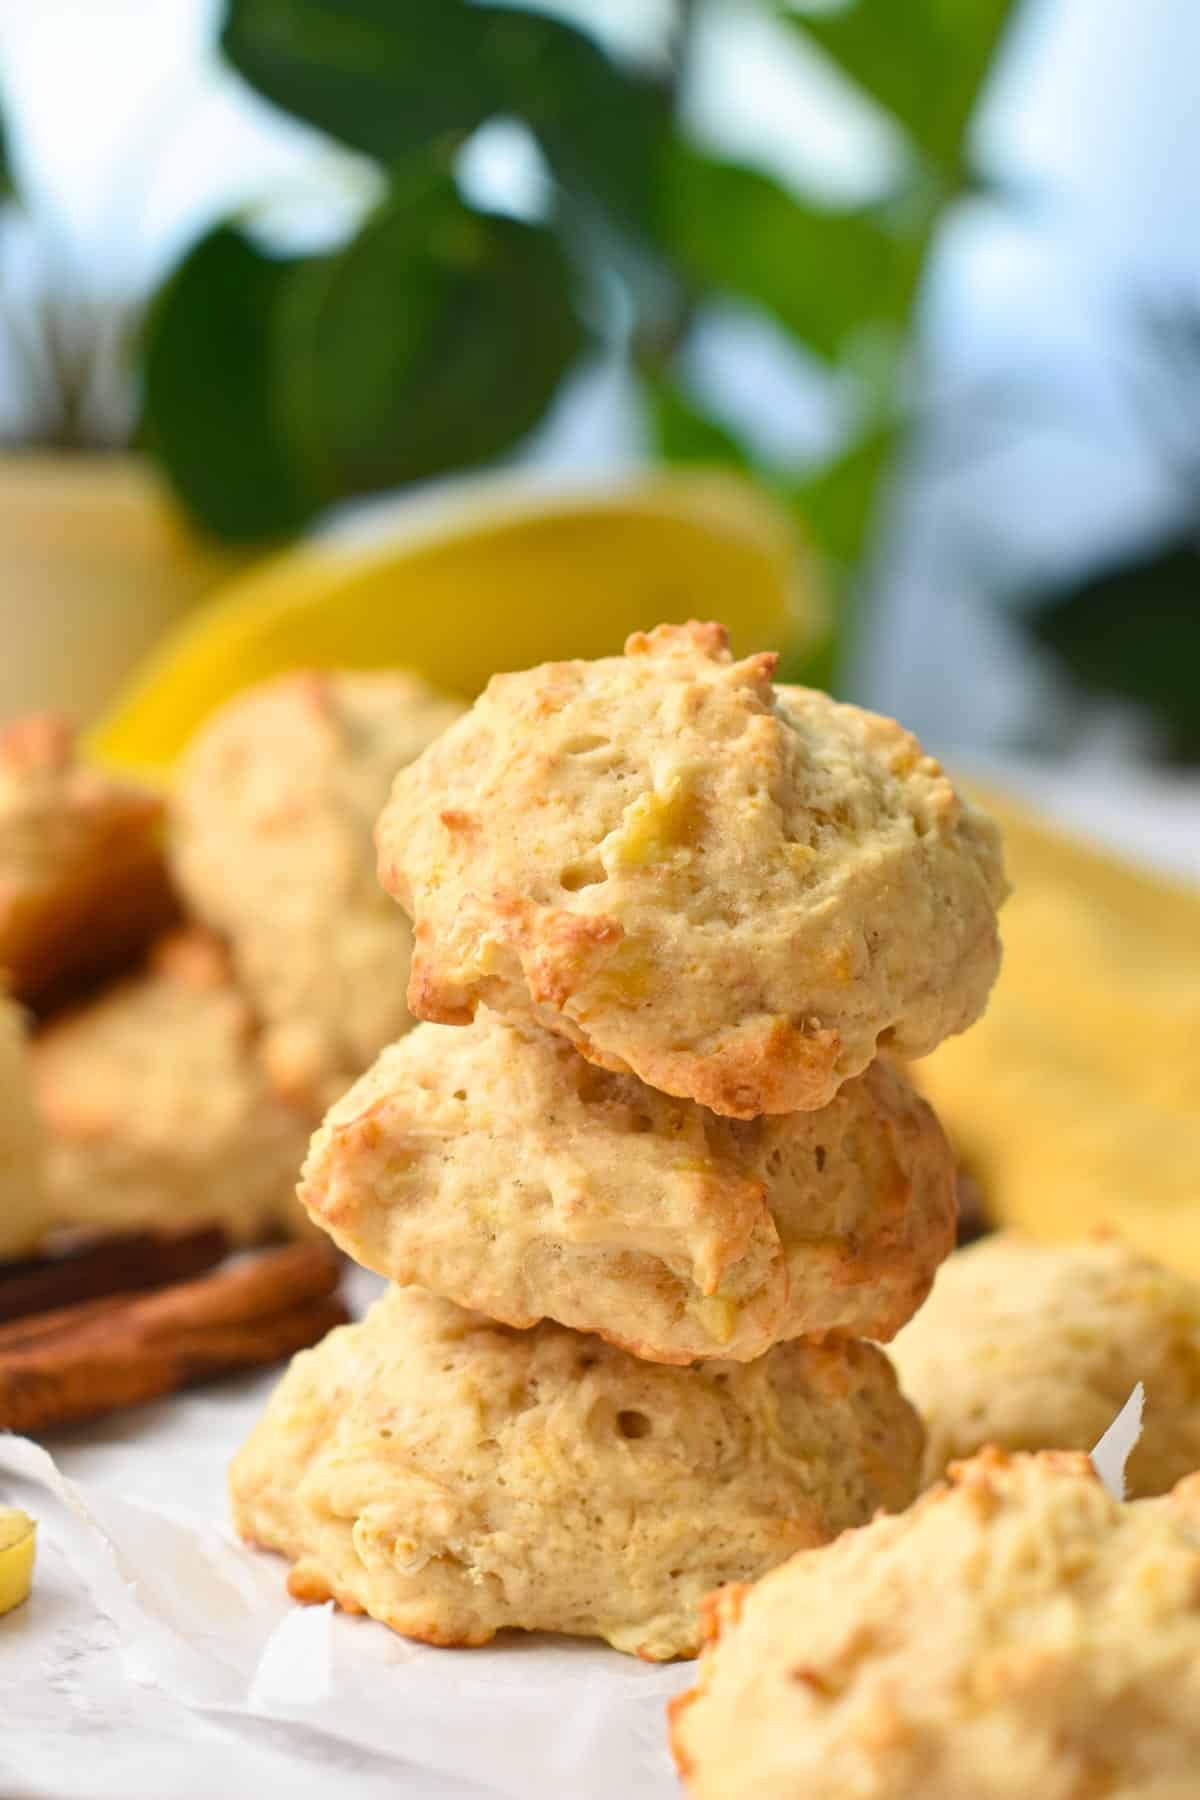 A stack of three banana cookies with green plants in the background.